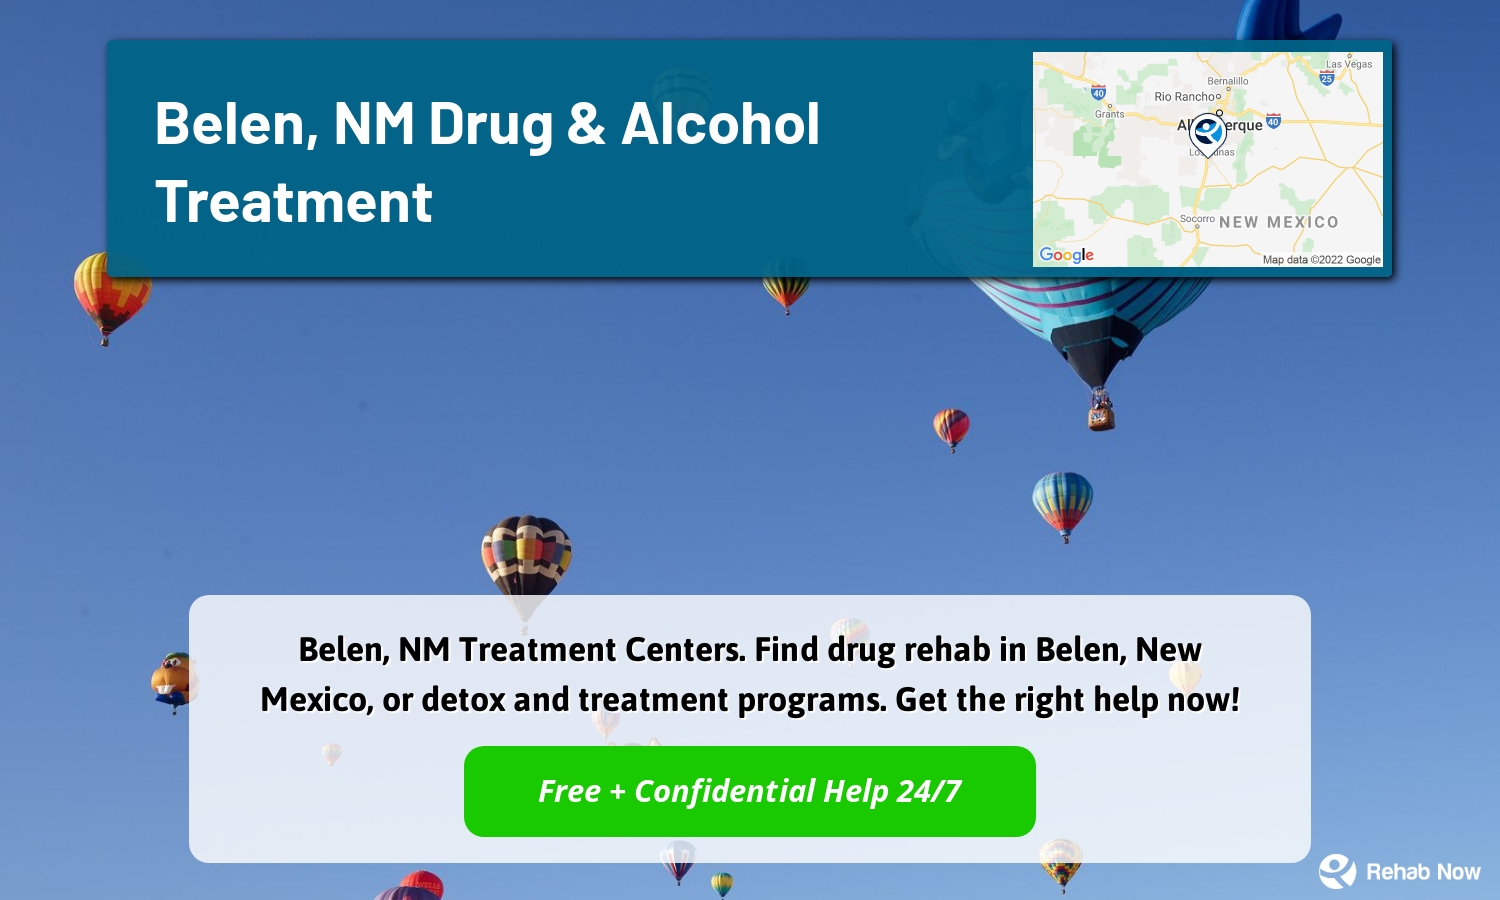 Belen, NM Treatment Centers. Find drug rehab in Belen, New Mexico, or detox and treatment programs. Get the right help now!